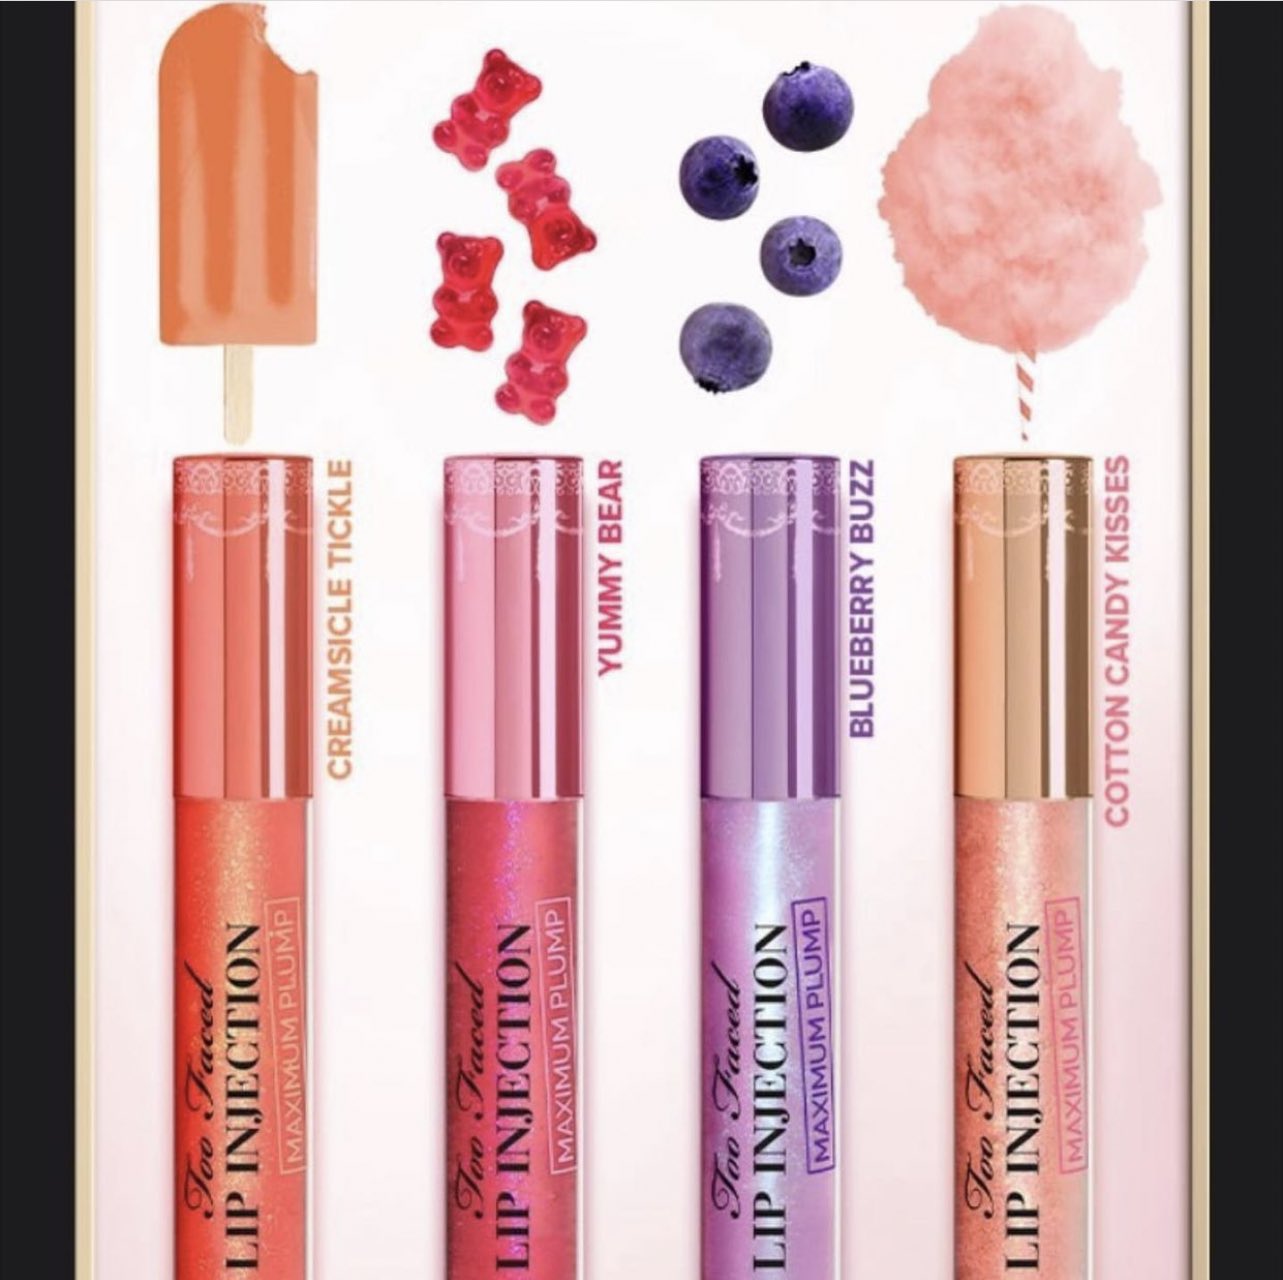 Trendmood on X: Available Now! 🚨 LINK ➡️  4 NEW!  Lip Injection Maximum Plump Shades 👄 #toofaced $33 each: 💕Cotton Candy  💗Yummy Bear 💜Blueberry Buzz 🧡Creamsicle Tickle   / X